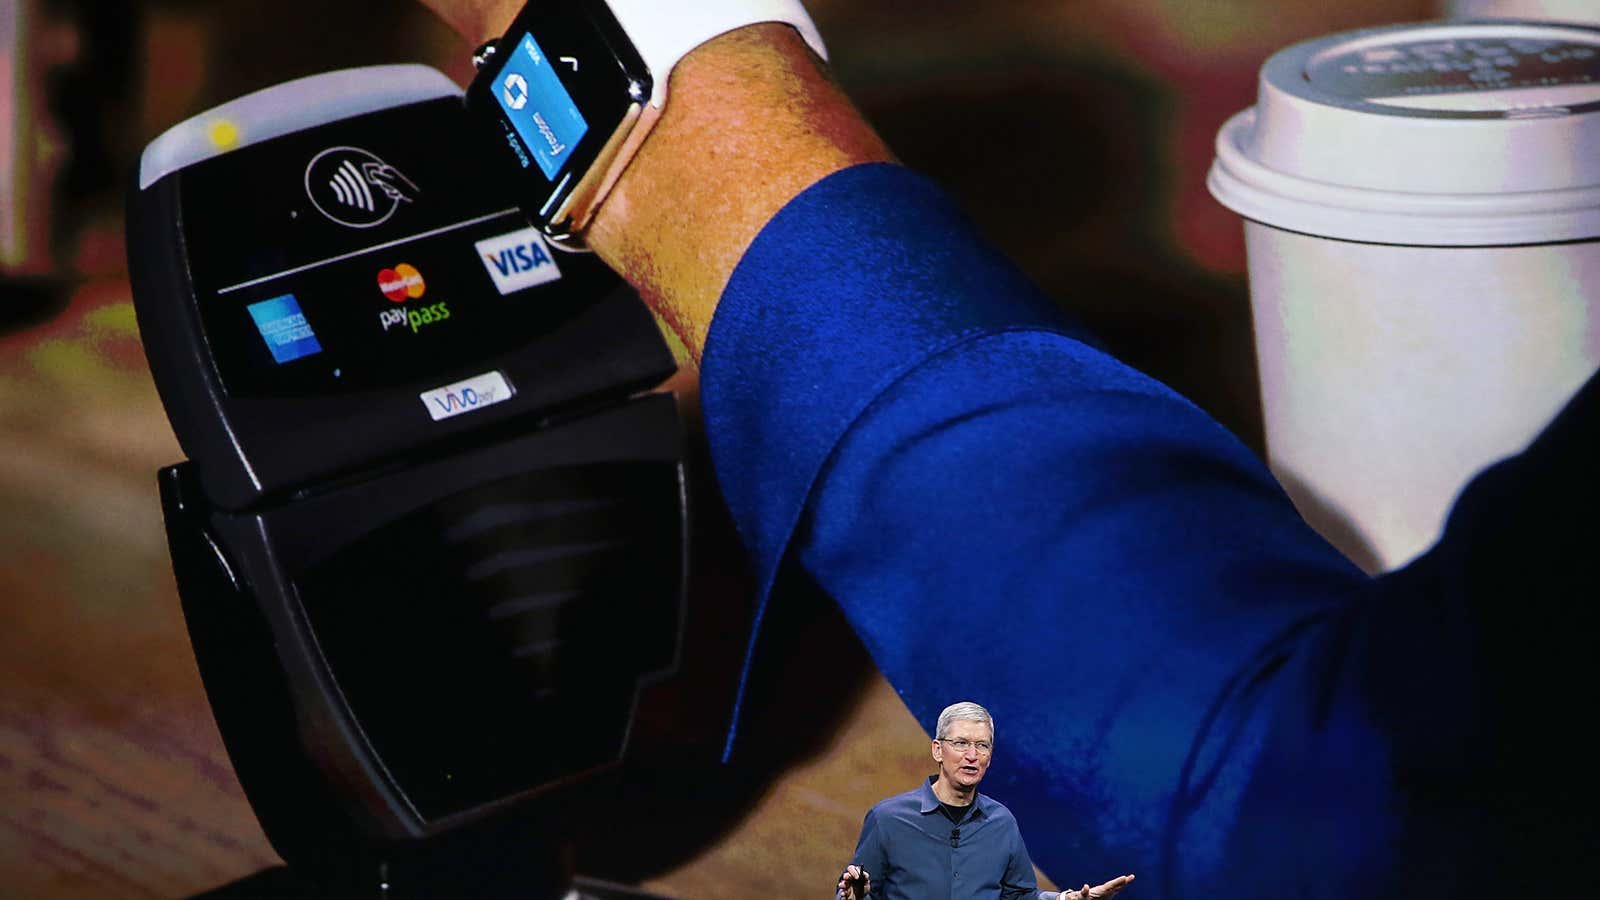 Hold up, let him (Tim) cook. Apple CEO shows off Apple Pay innovations.